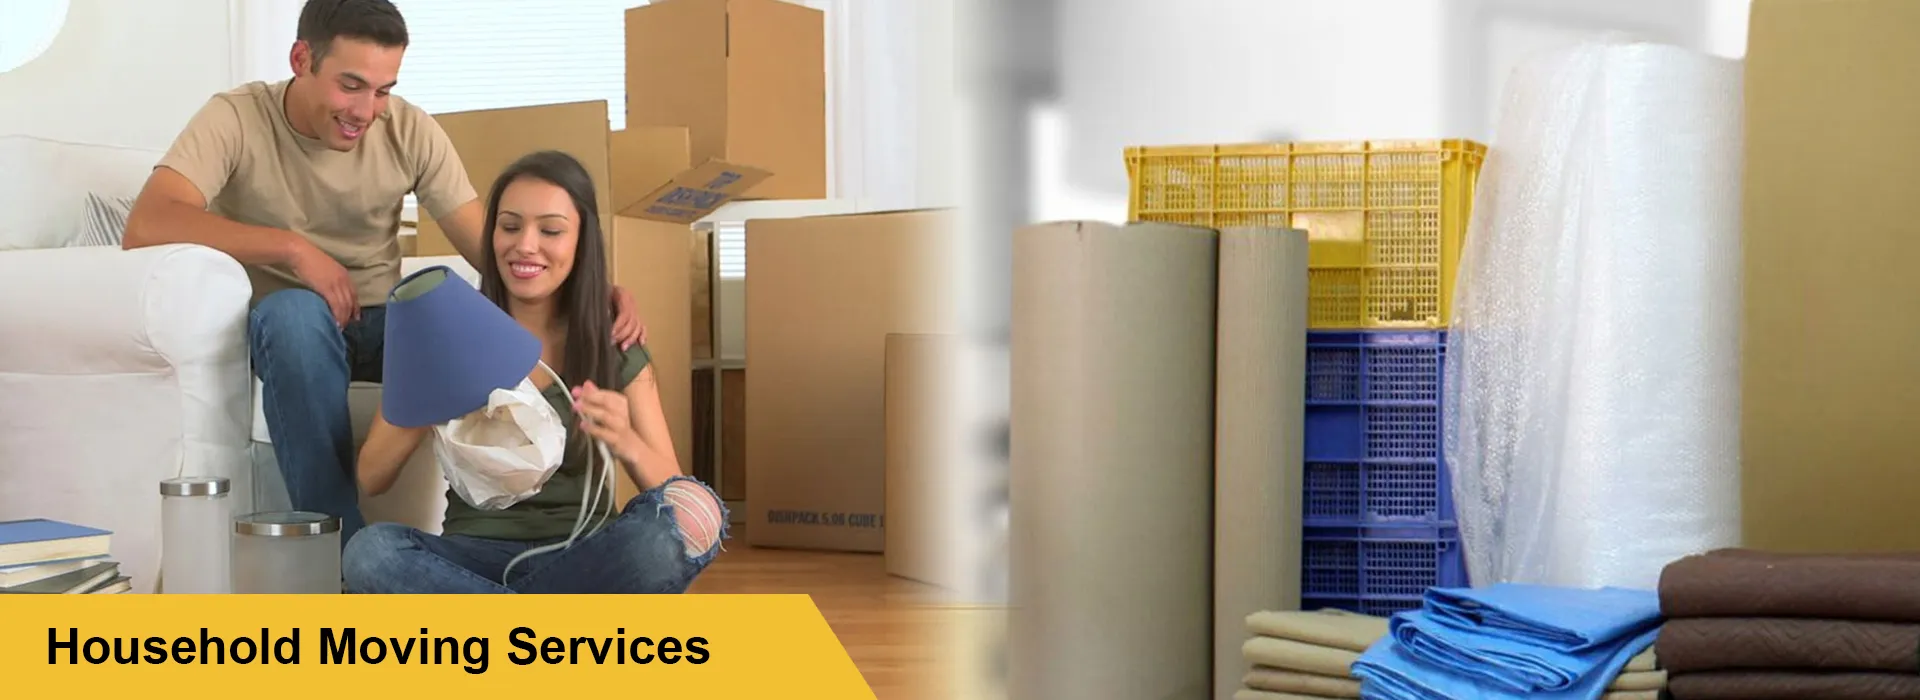 Kartik Packers and Movers Delhi